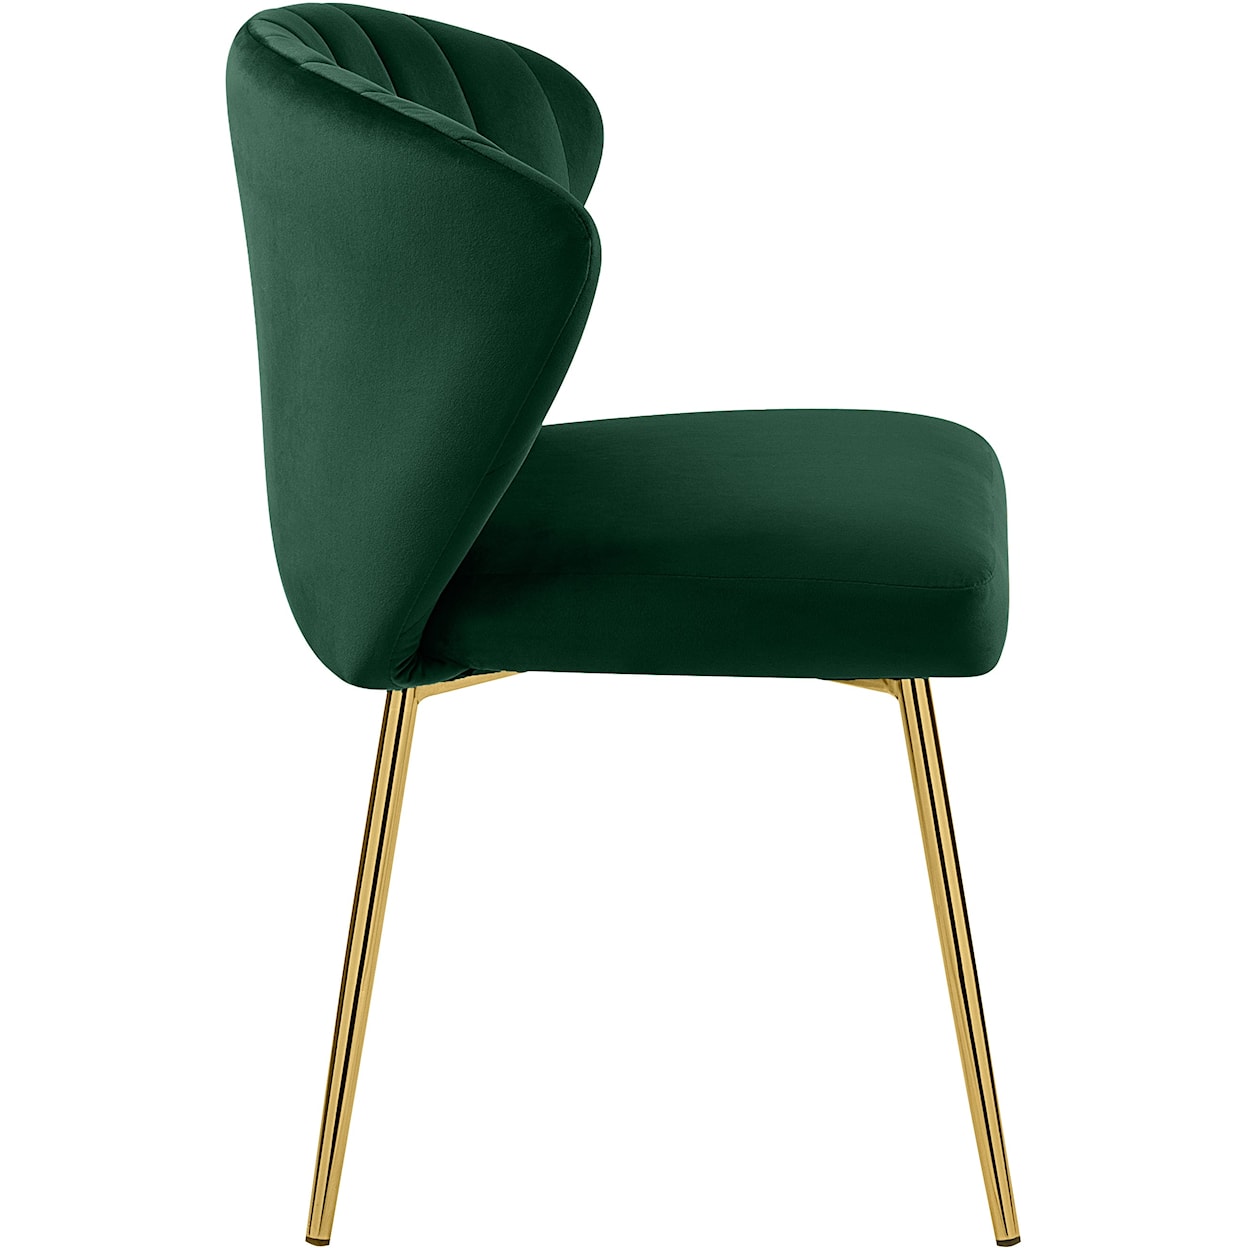 Meridian Furniture Finley Green Velvet Dining Chair with Gold Legs